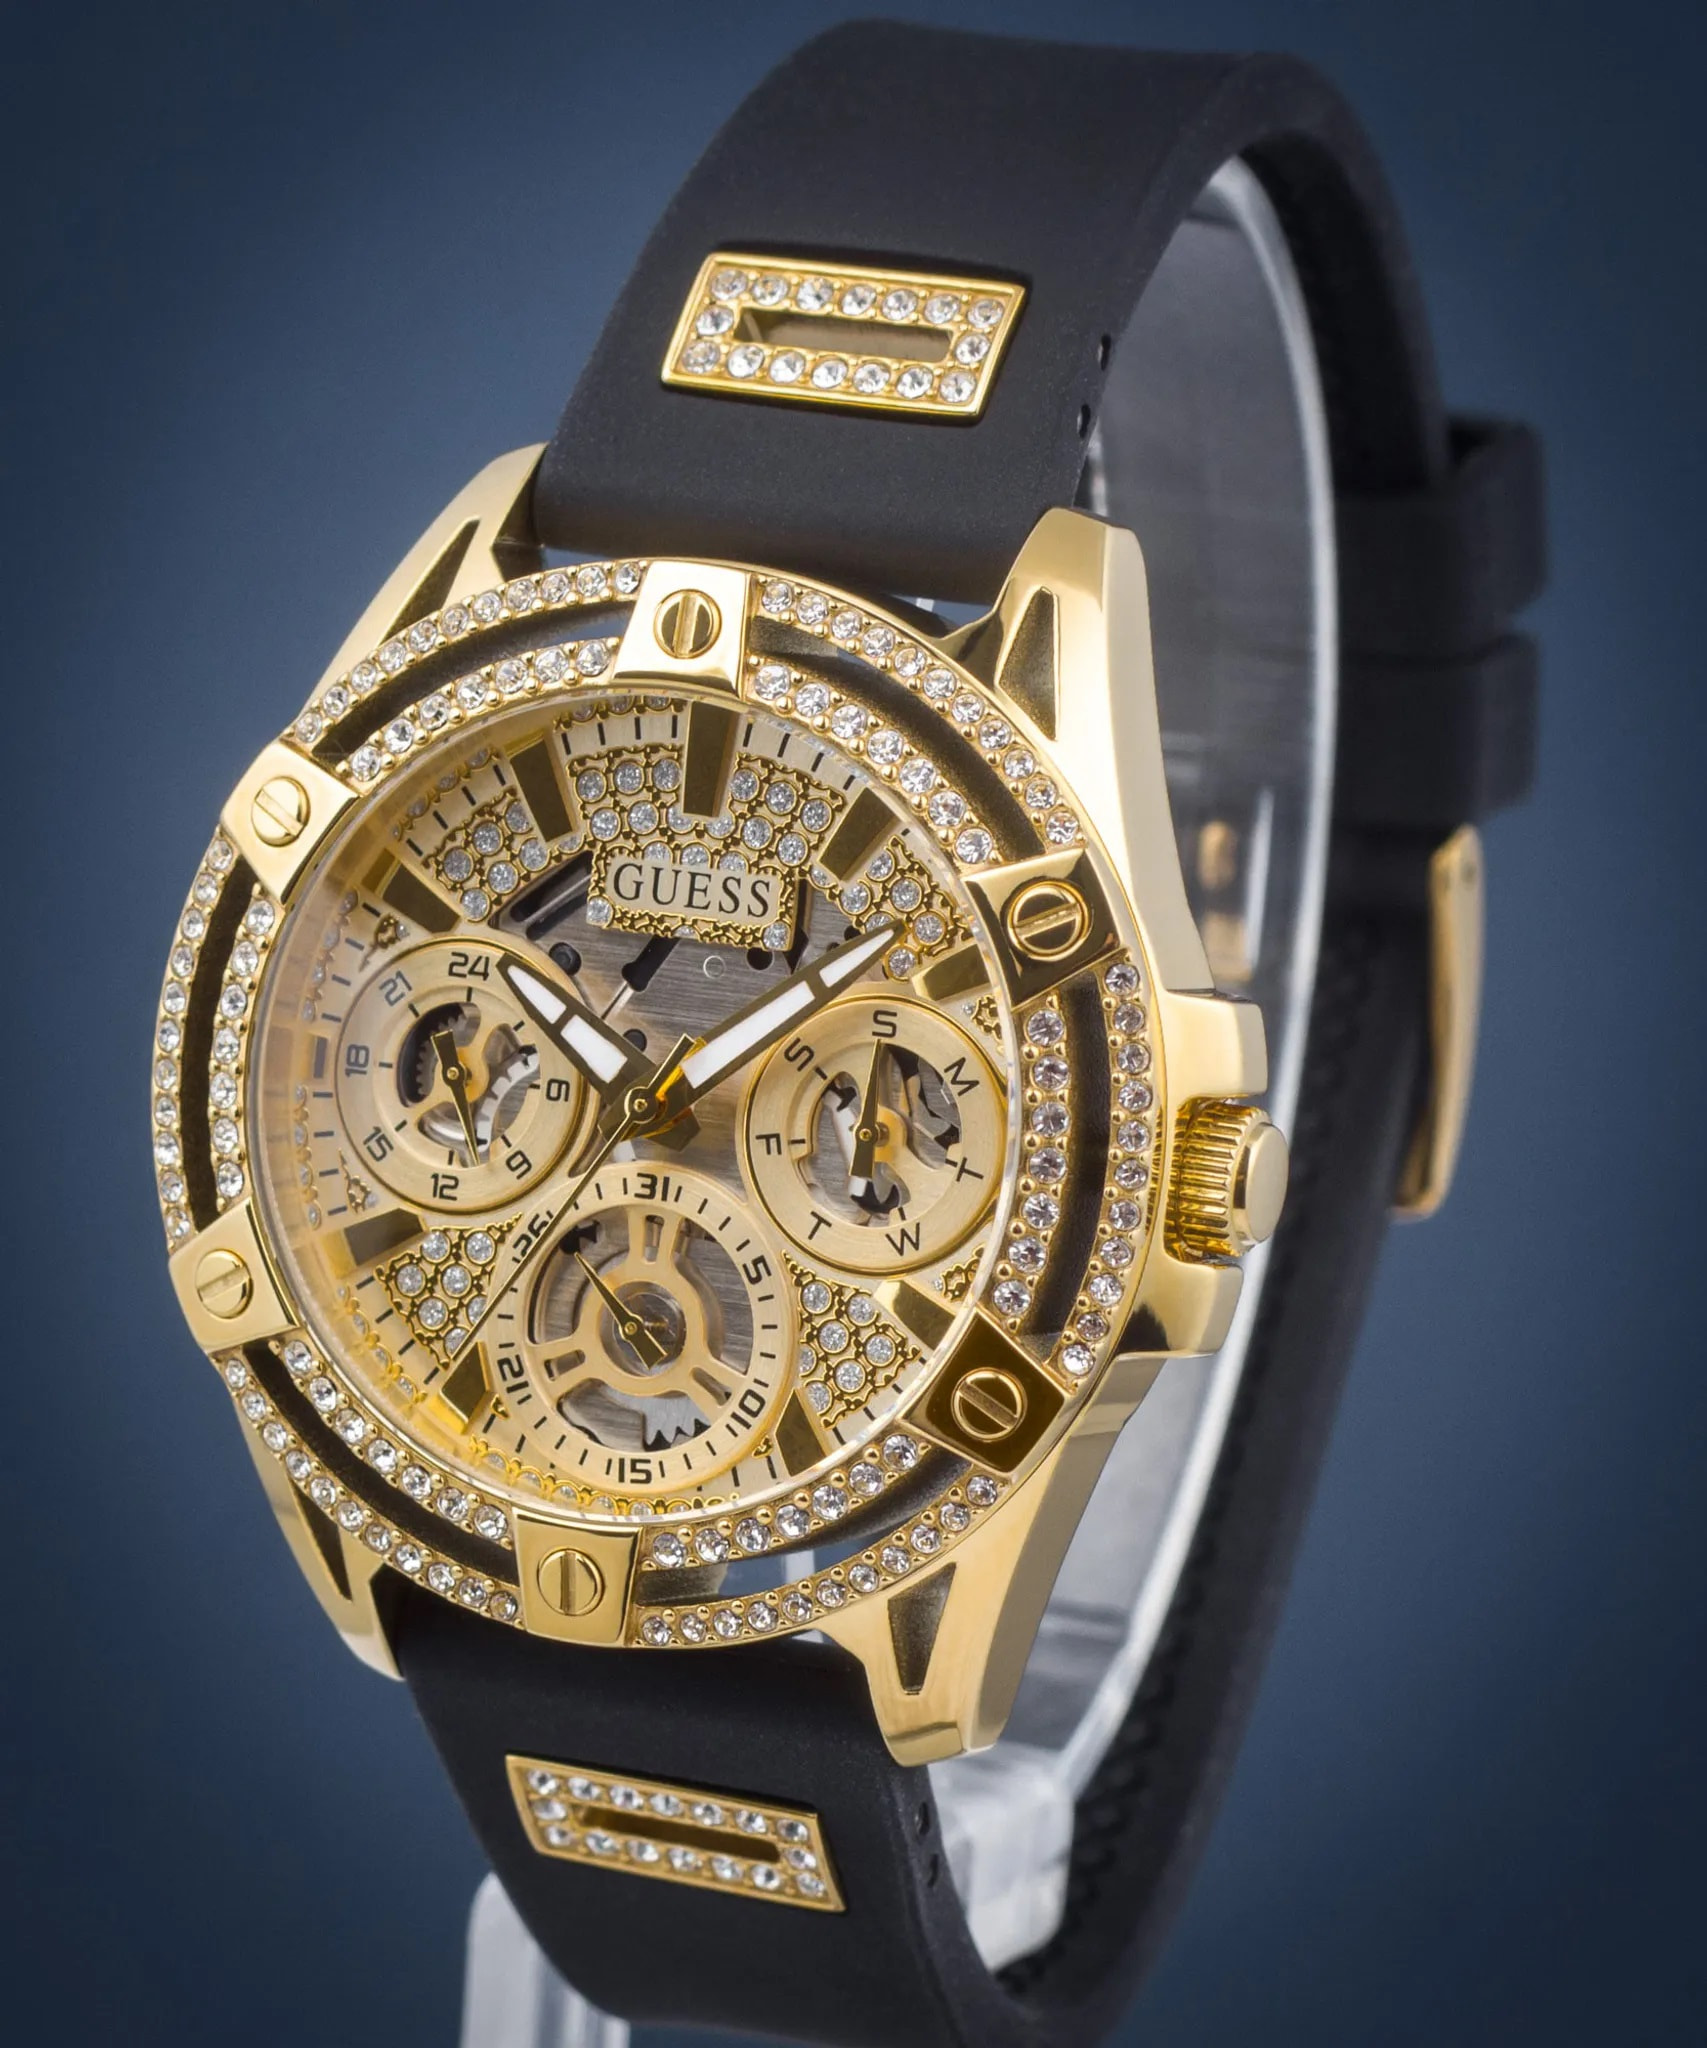 ĐỒNG HỒ ĐEO TAY GUESS GOLD-TONE MULTI-FUNCTION BLACK SILICONE WATCH GW0536L3 10